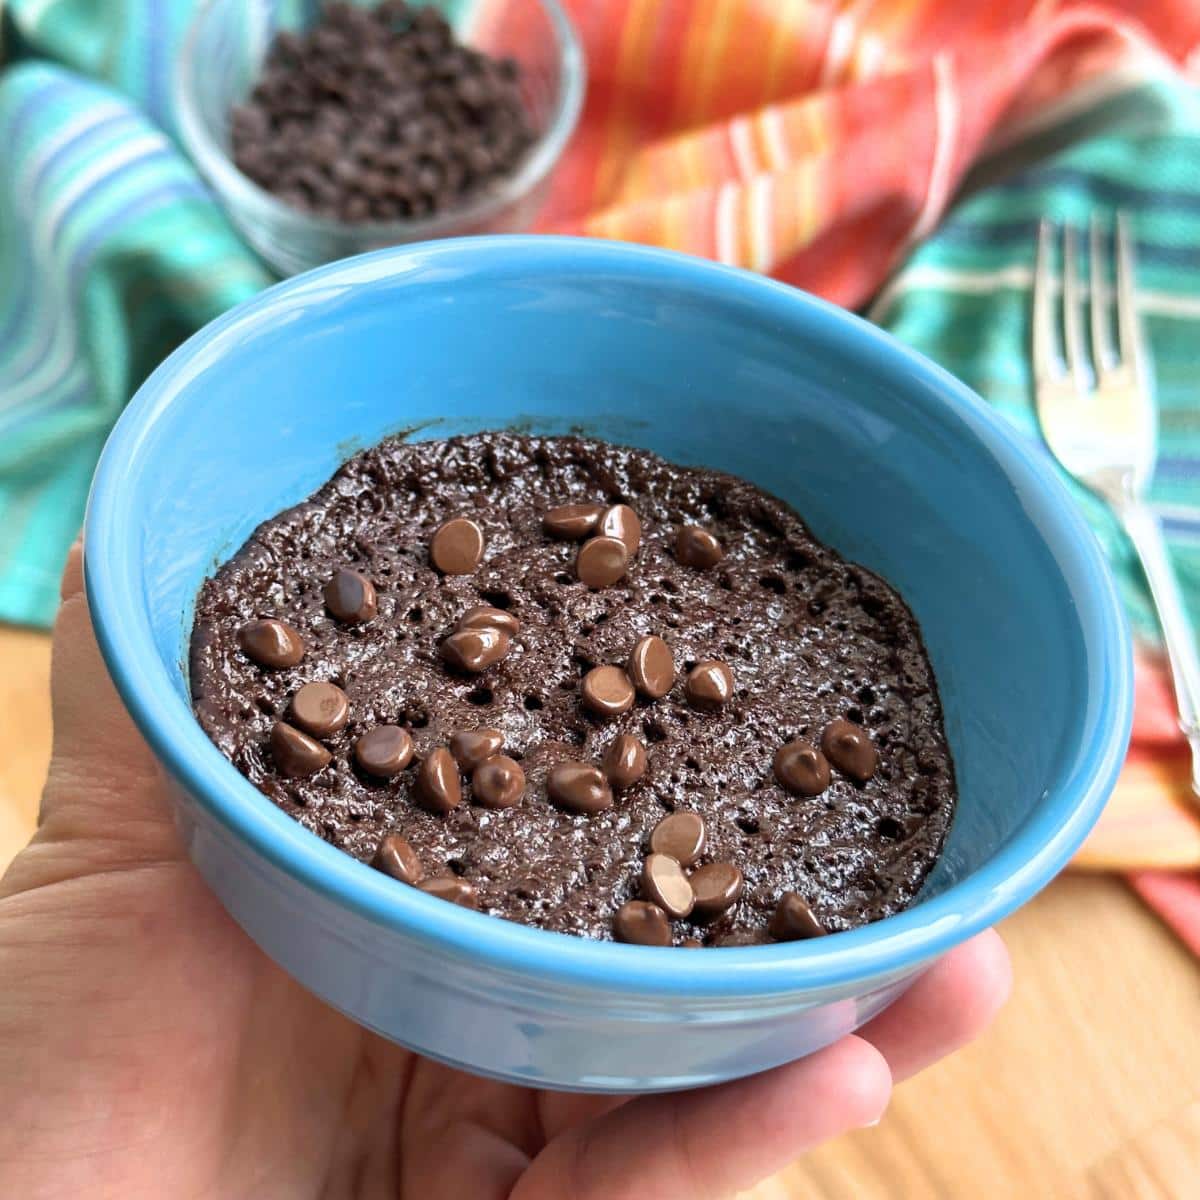 Vegan individual microwave brownie in a small 8 ounce blue bowl. Hand holding the bowl to show shallow depth. Colorful striped cloth in background with fork and bowl of chocolate chips.